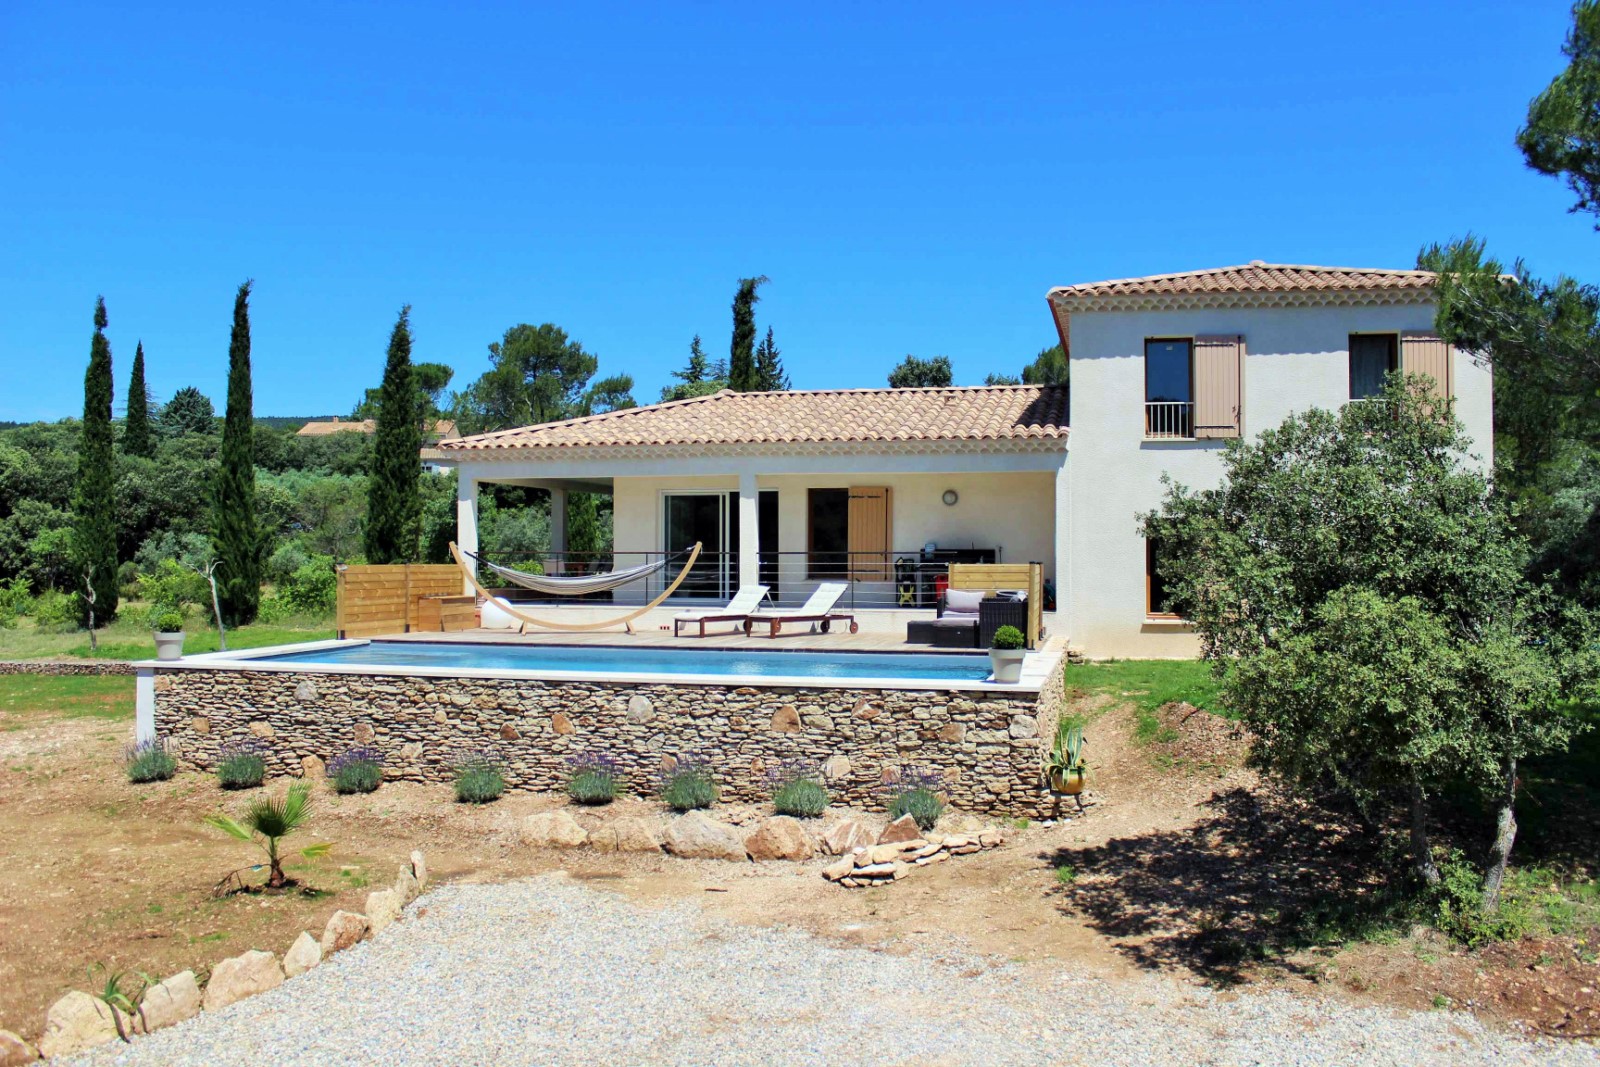 Contemporary villa with views 5 minutes walk from the village of Cabrières d'Avignon